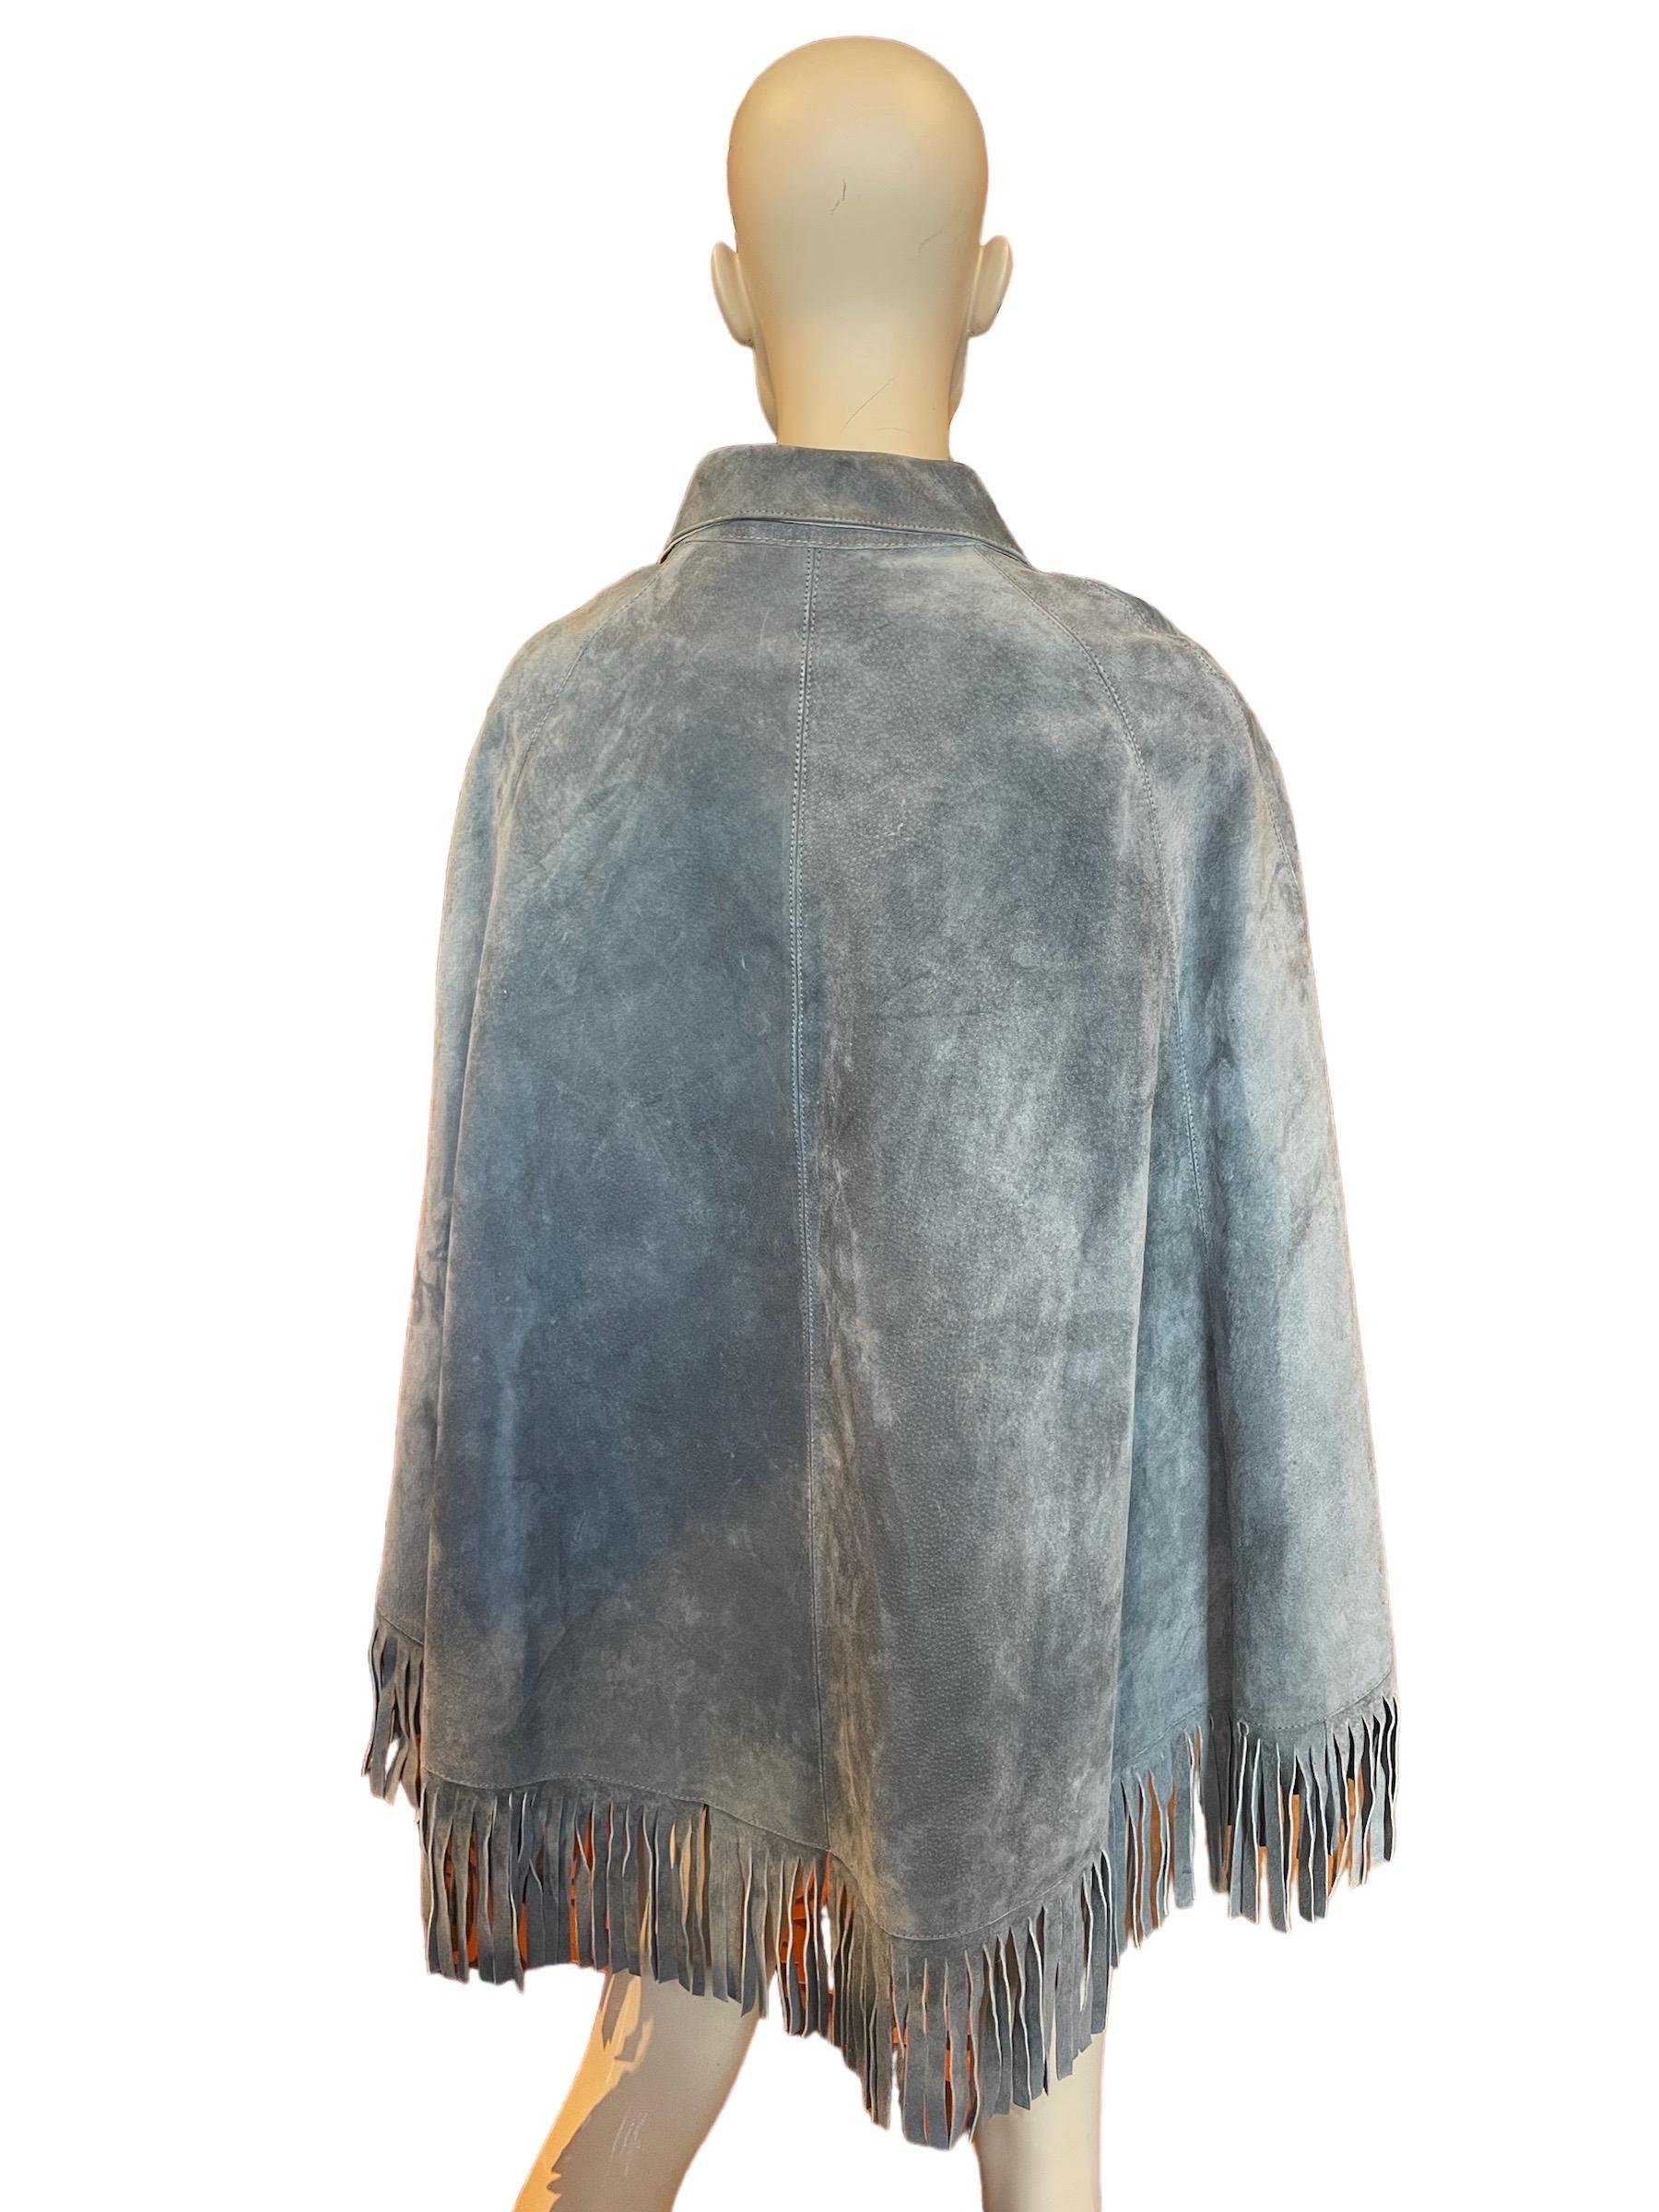 1970s Grey Blue Suede Fringed Collared Zip Up Poncho with Flower Details  In Good Condition For Sale In Greenport, NY